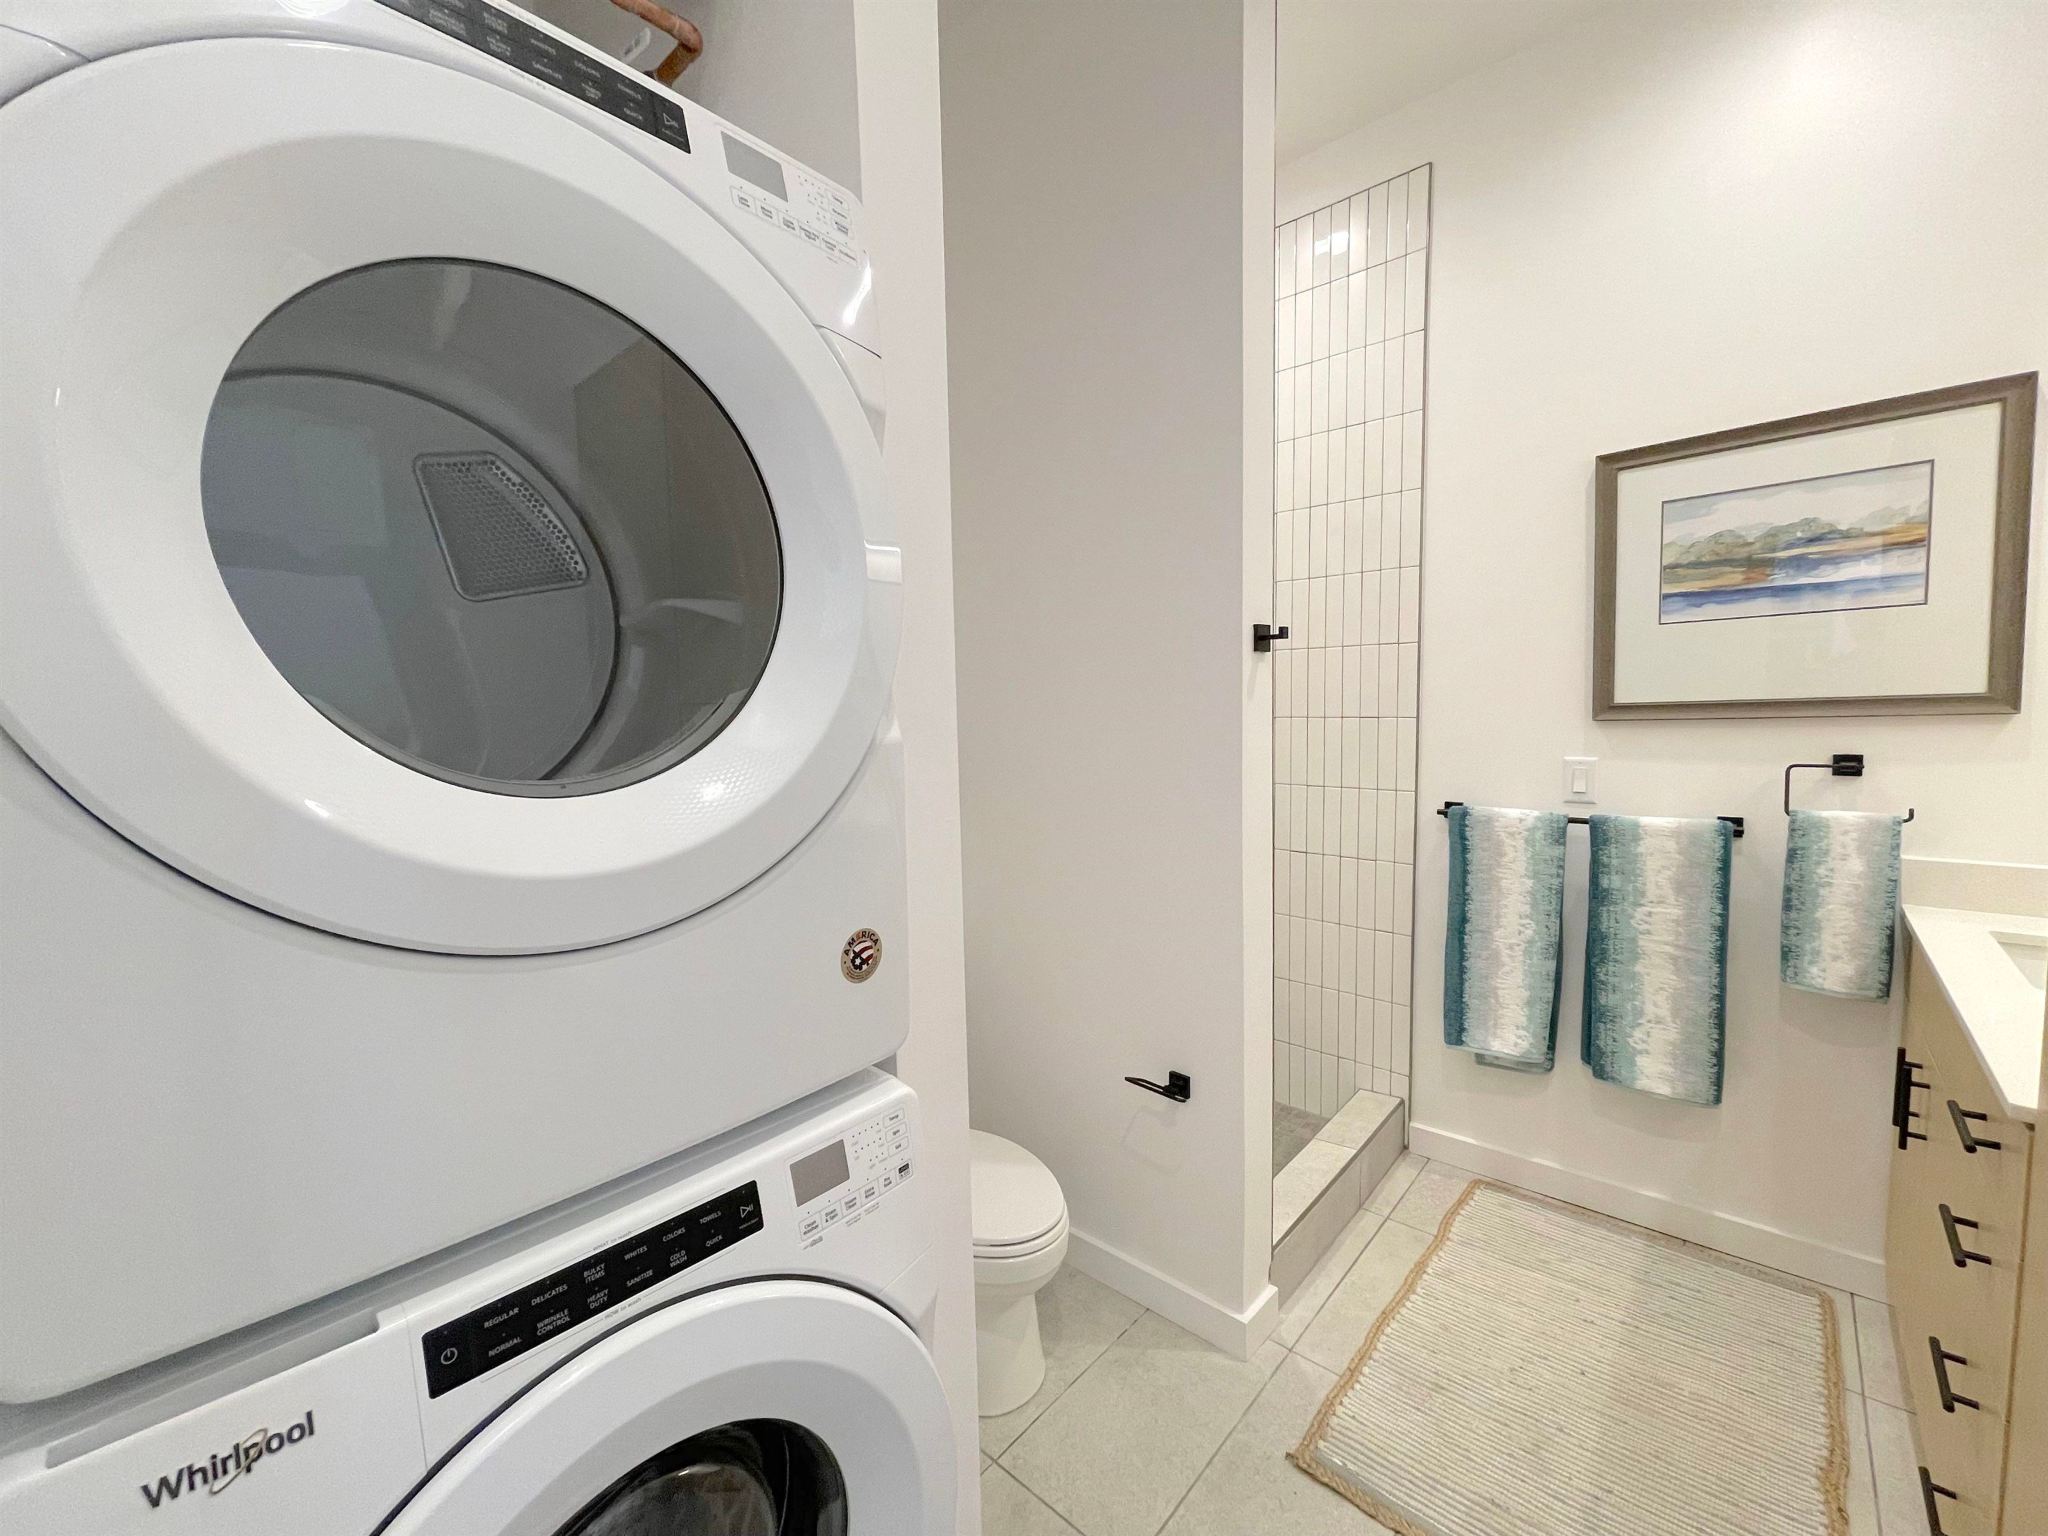 Second Floor – ¾ Bath with stacked Washer and Dryer